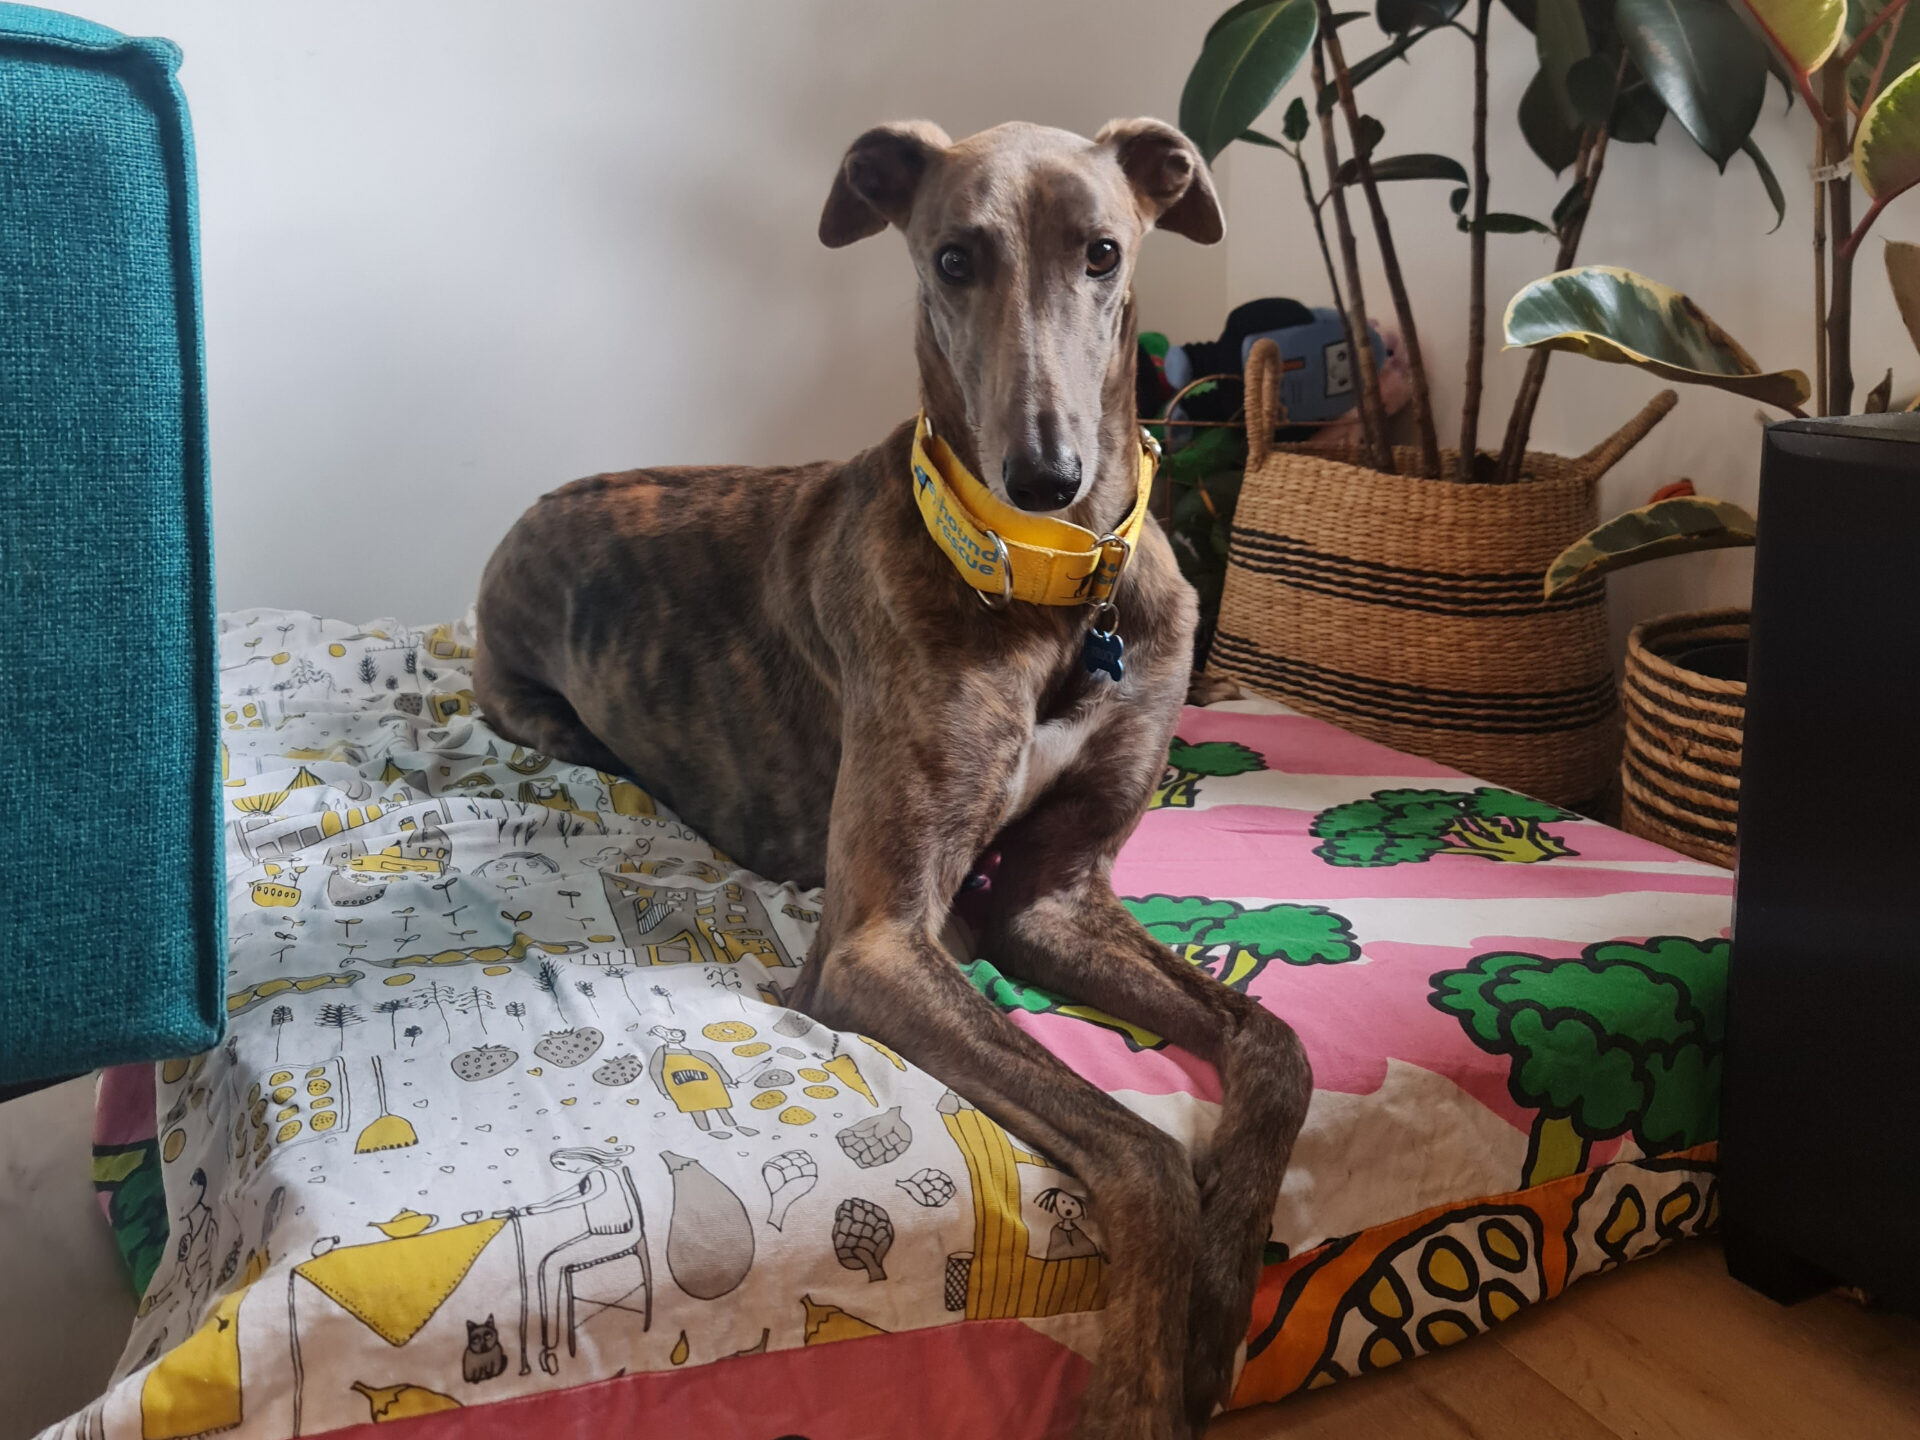 Brock the greyhound sits on bed